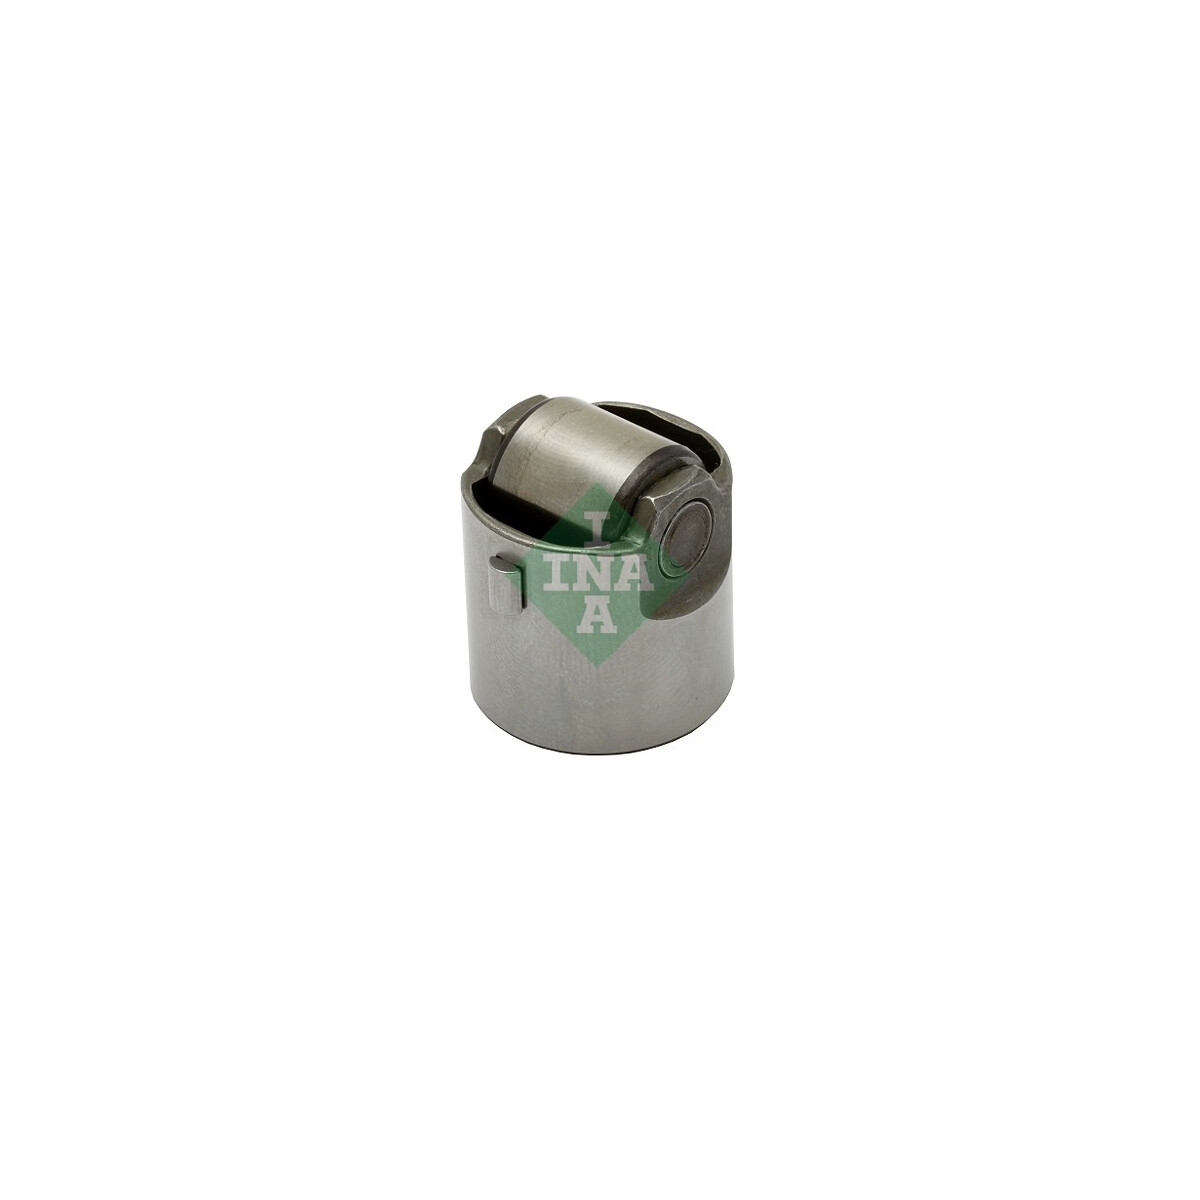 Plunger / Cam Follower from the high pressure pump for VAG TFSI-engin,  22,90 €